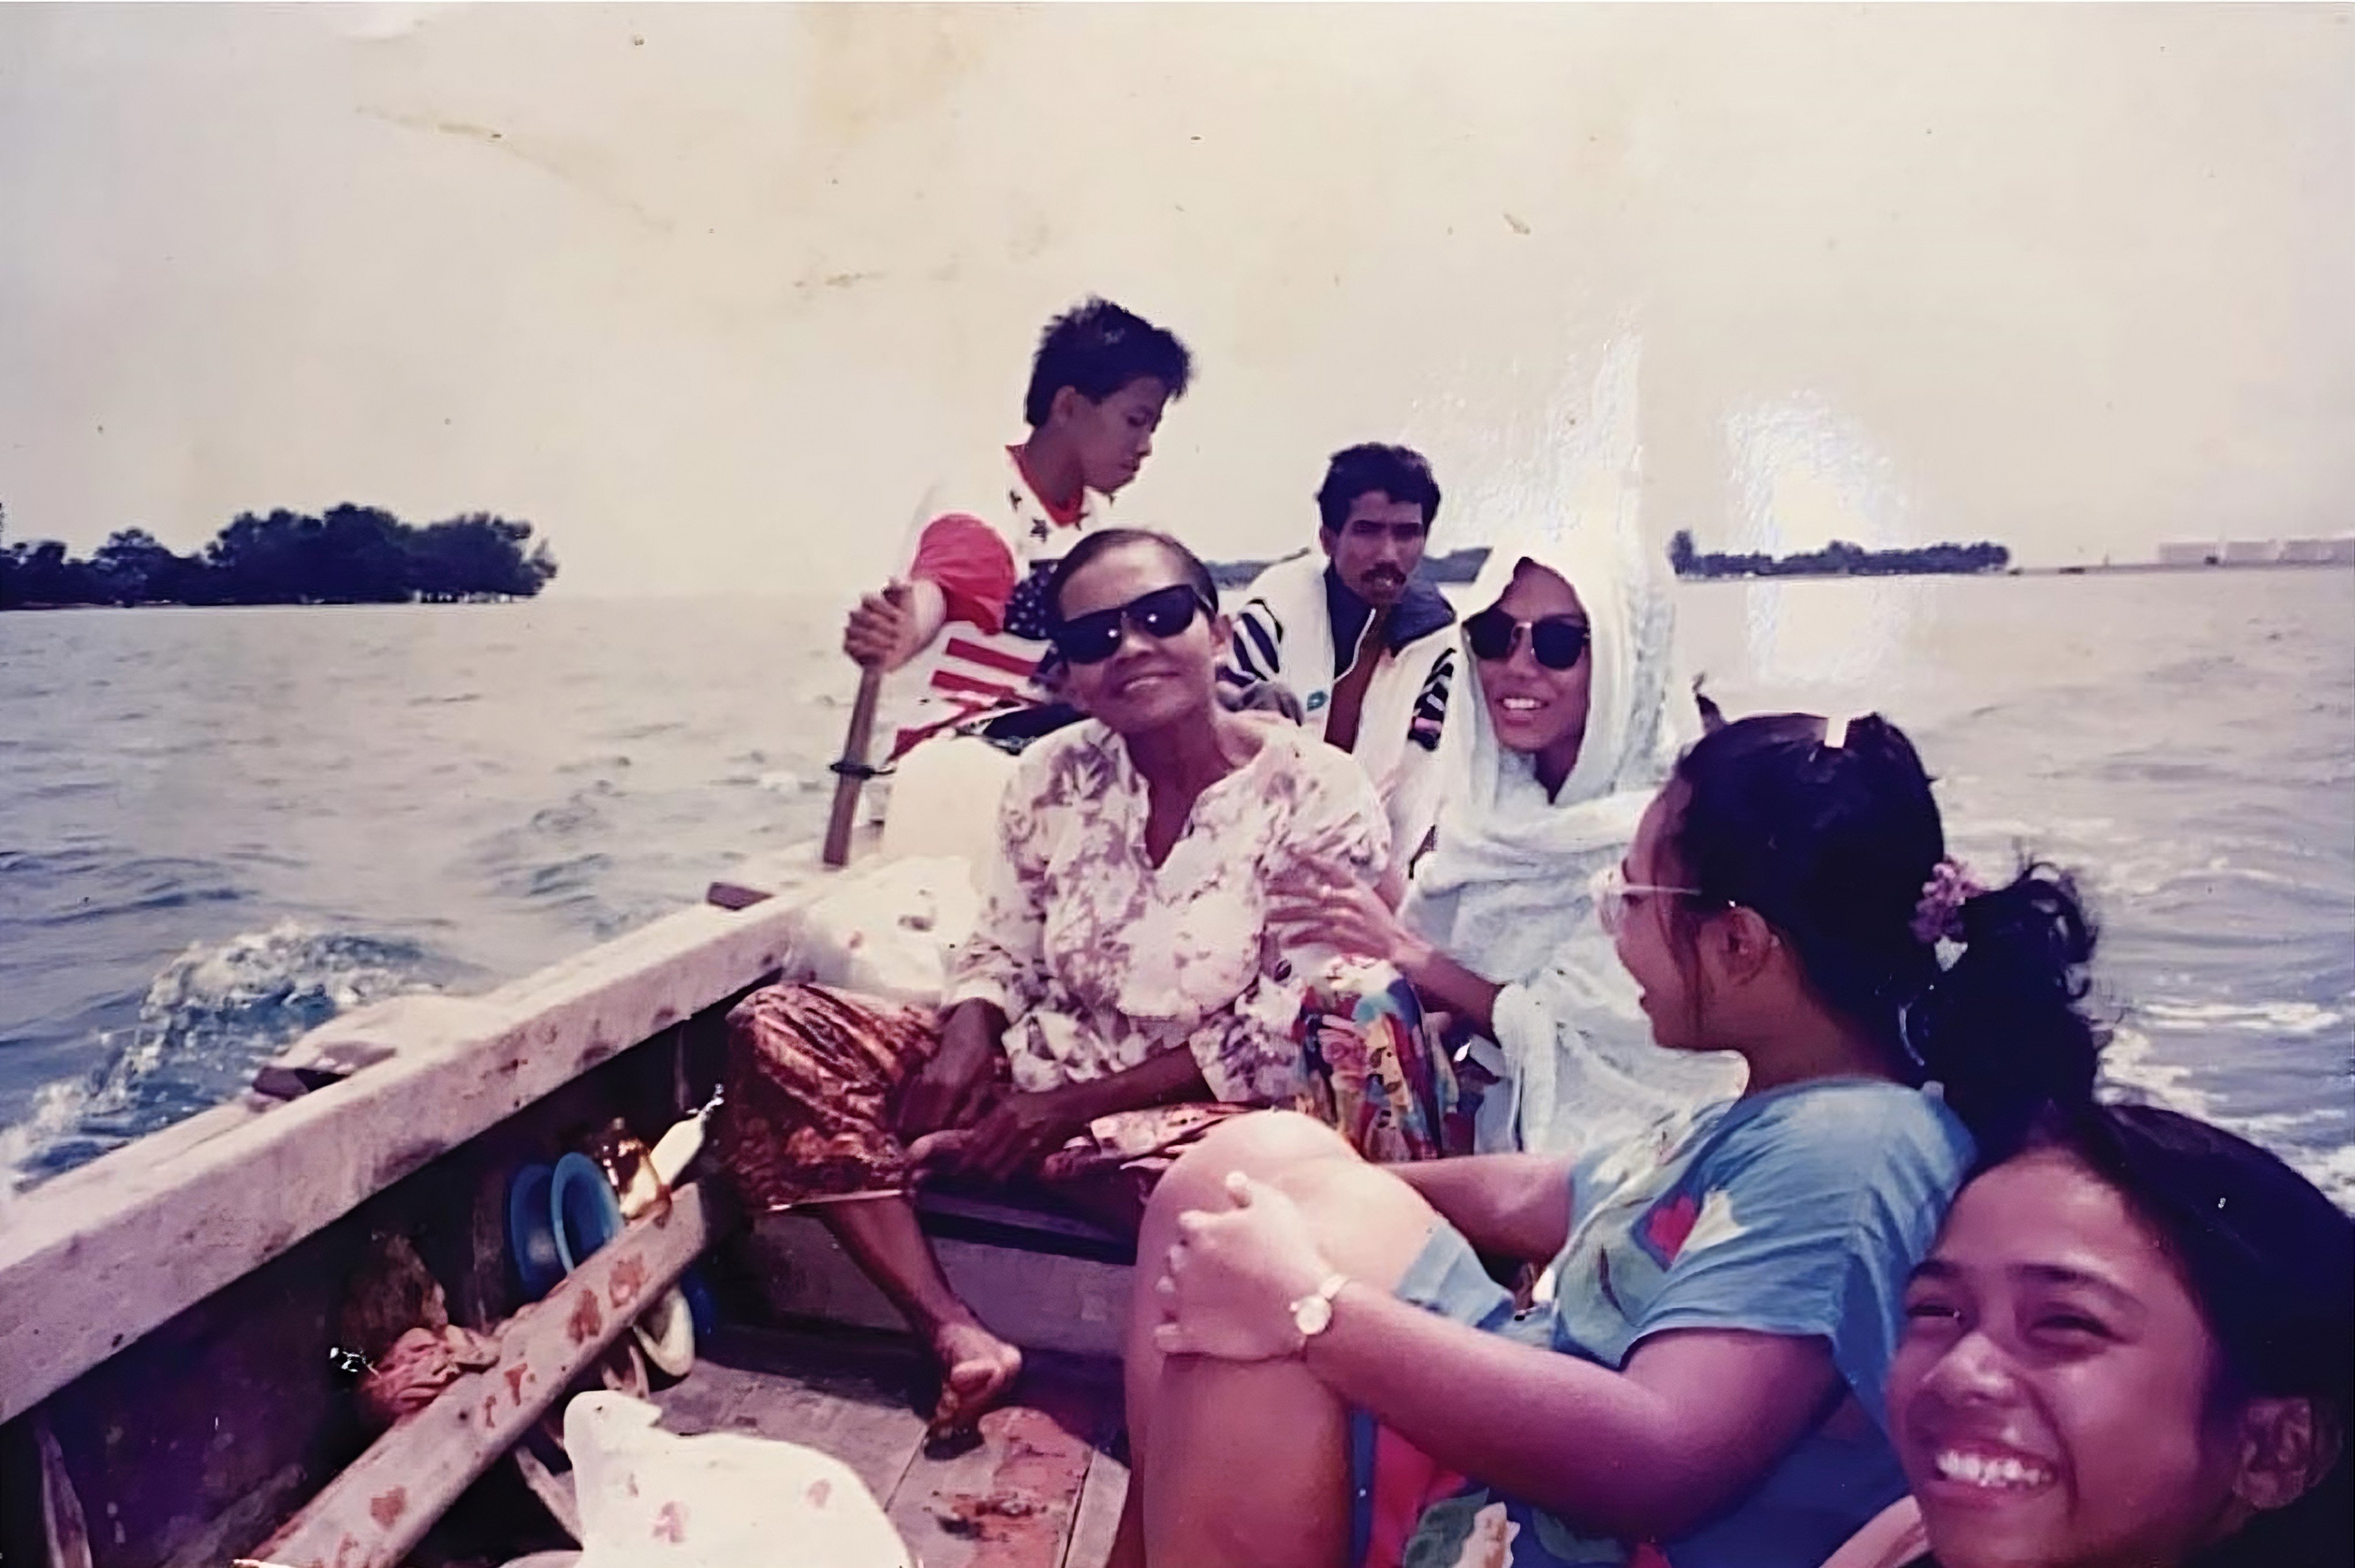 An old family photo shows a boat trip to Pulau Seking to get supplies while revisiting Pulau Semakau in 1988. Both islands now form the Semakau Landfill. Photo: Instagram/oranglautsg